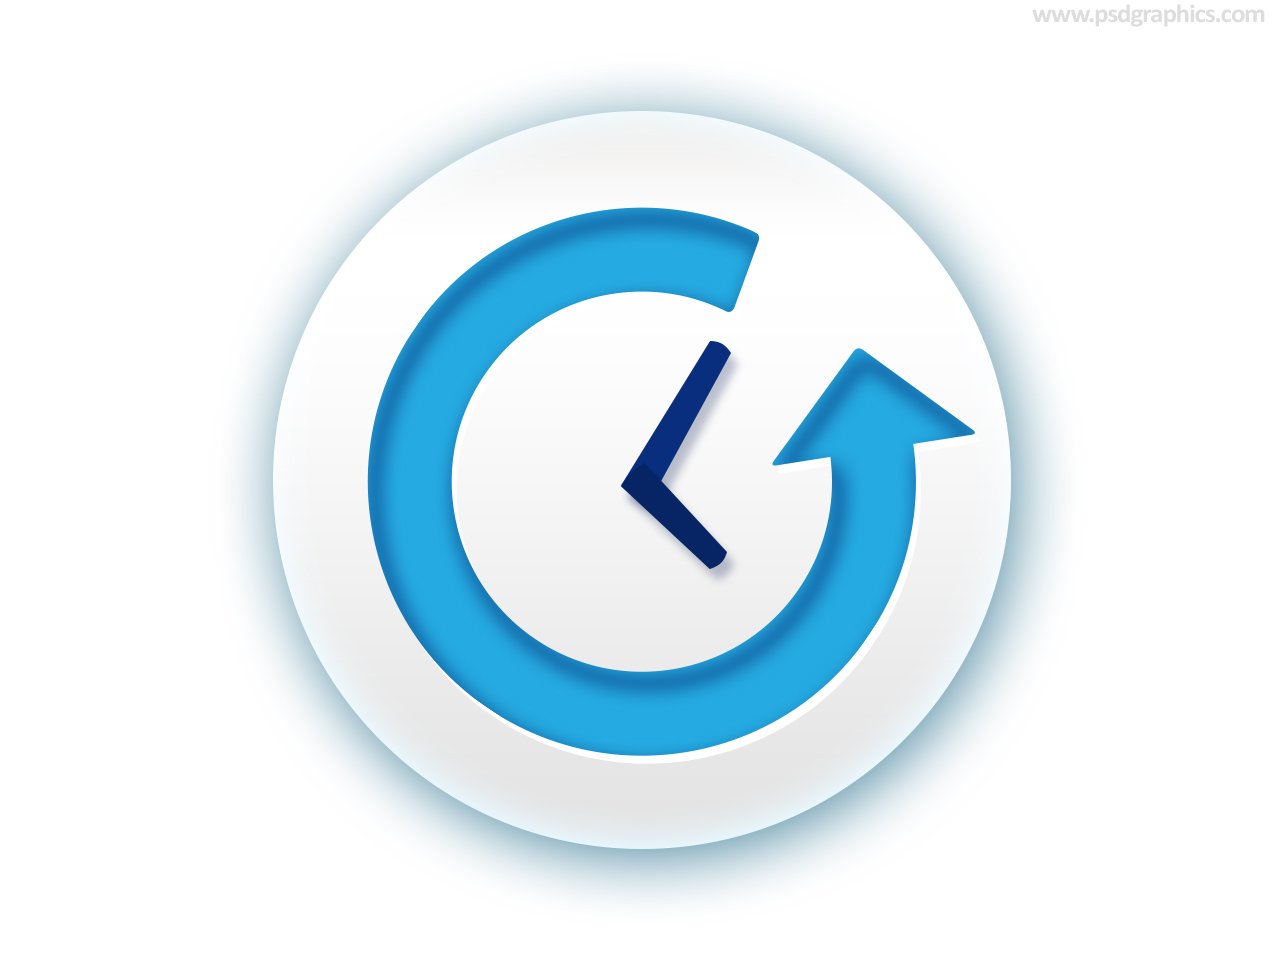 Time machine and recovery icon (PSD) - PSDgraphics